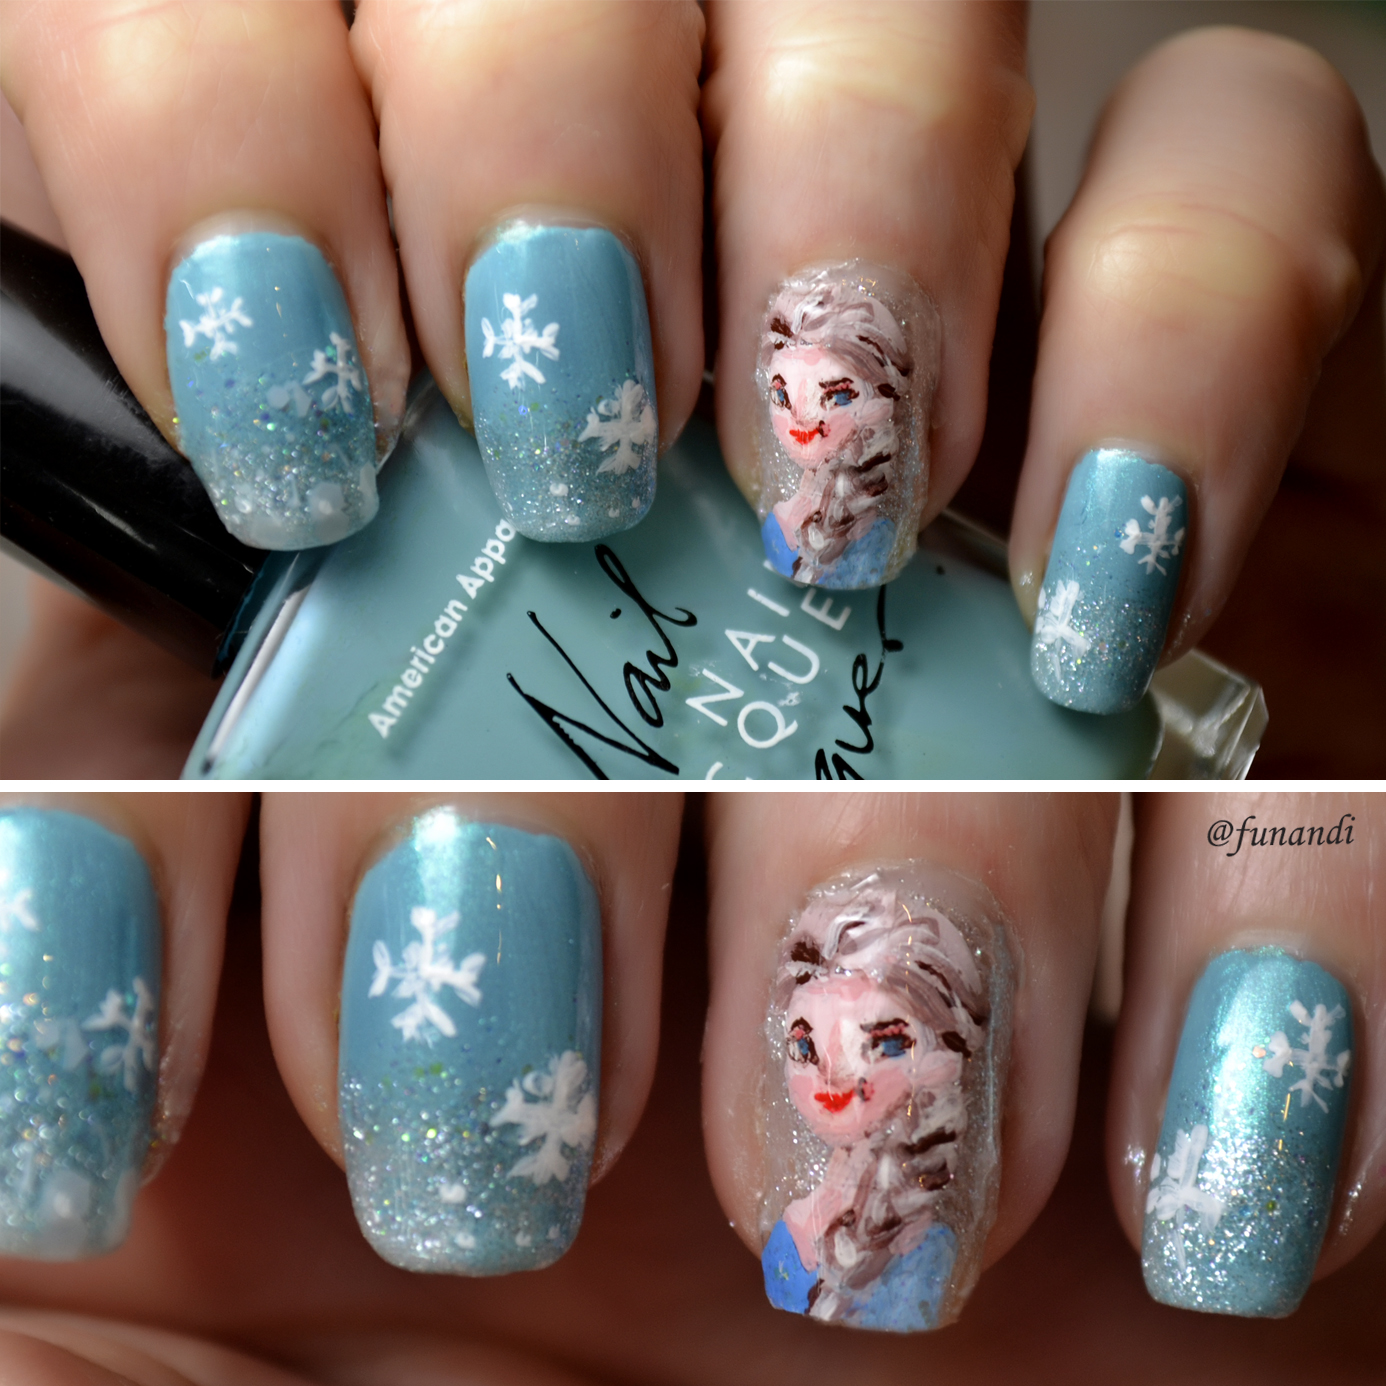 Colour your life: All Nail Team Challenge designs